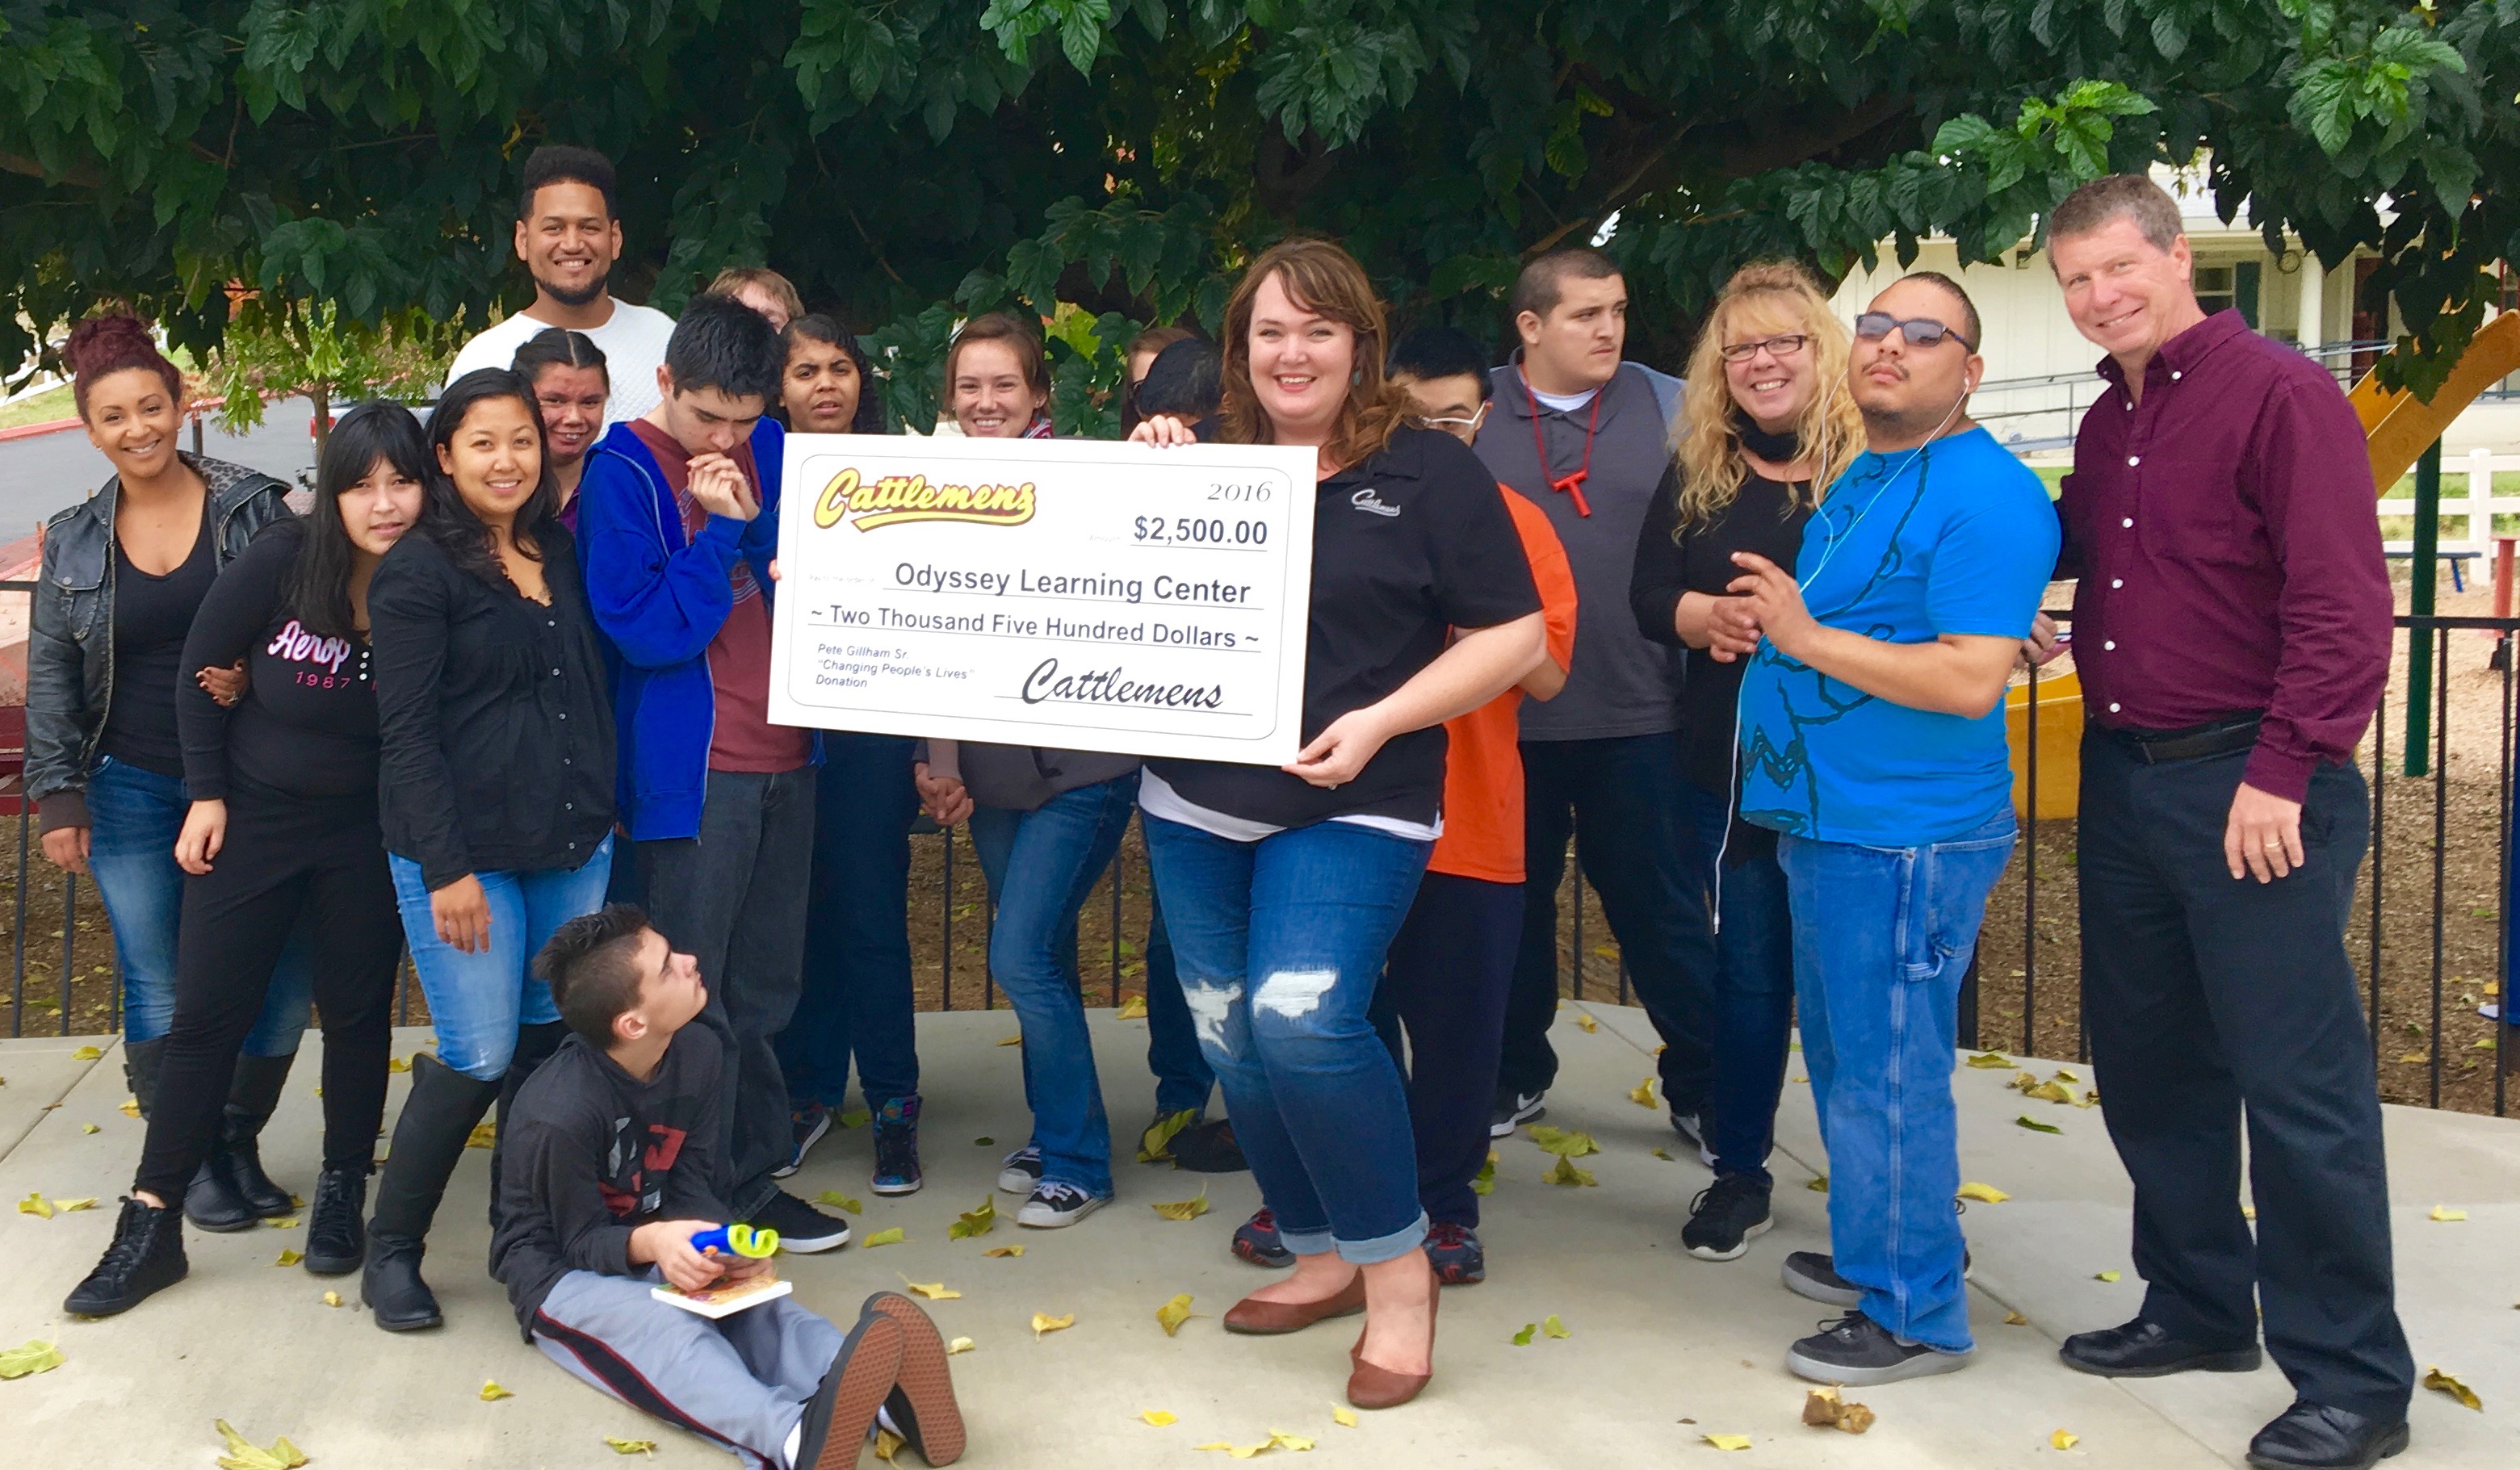 Cattlemens Donation to Odyssey Learning Center